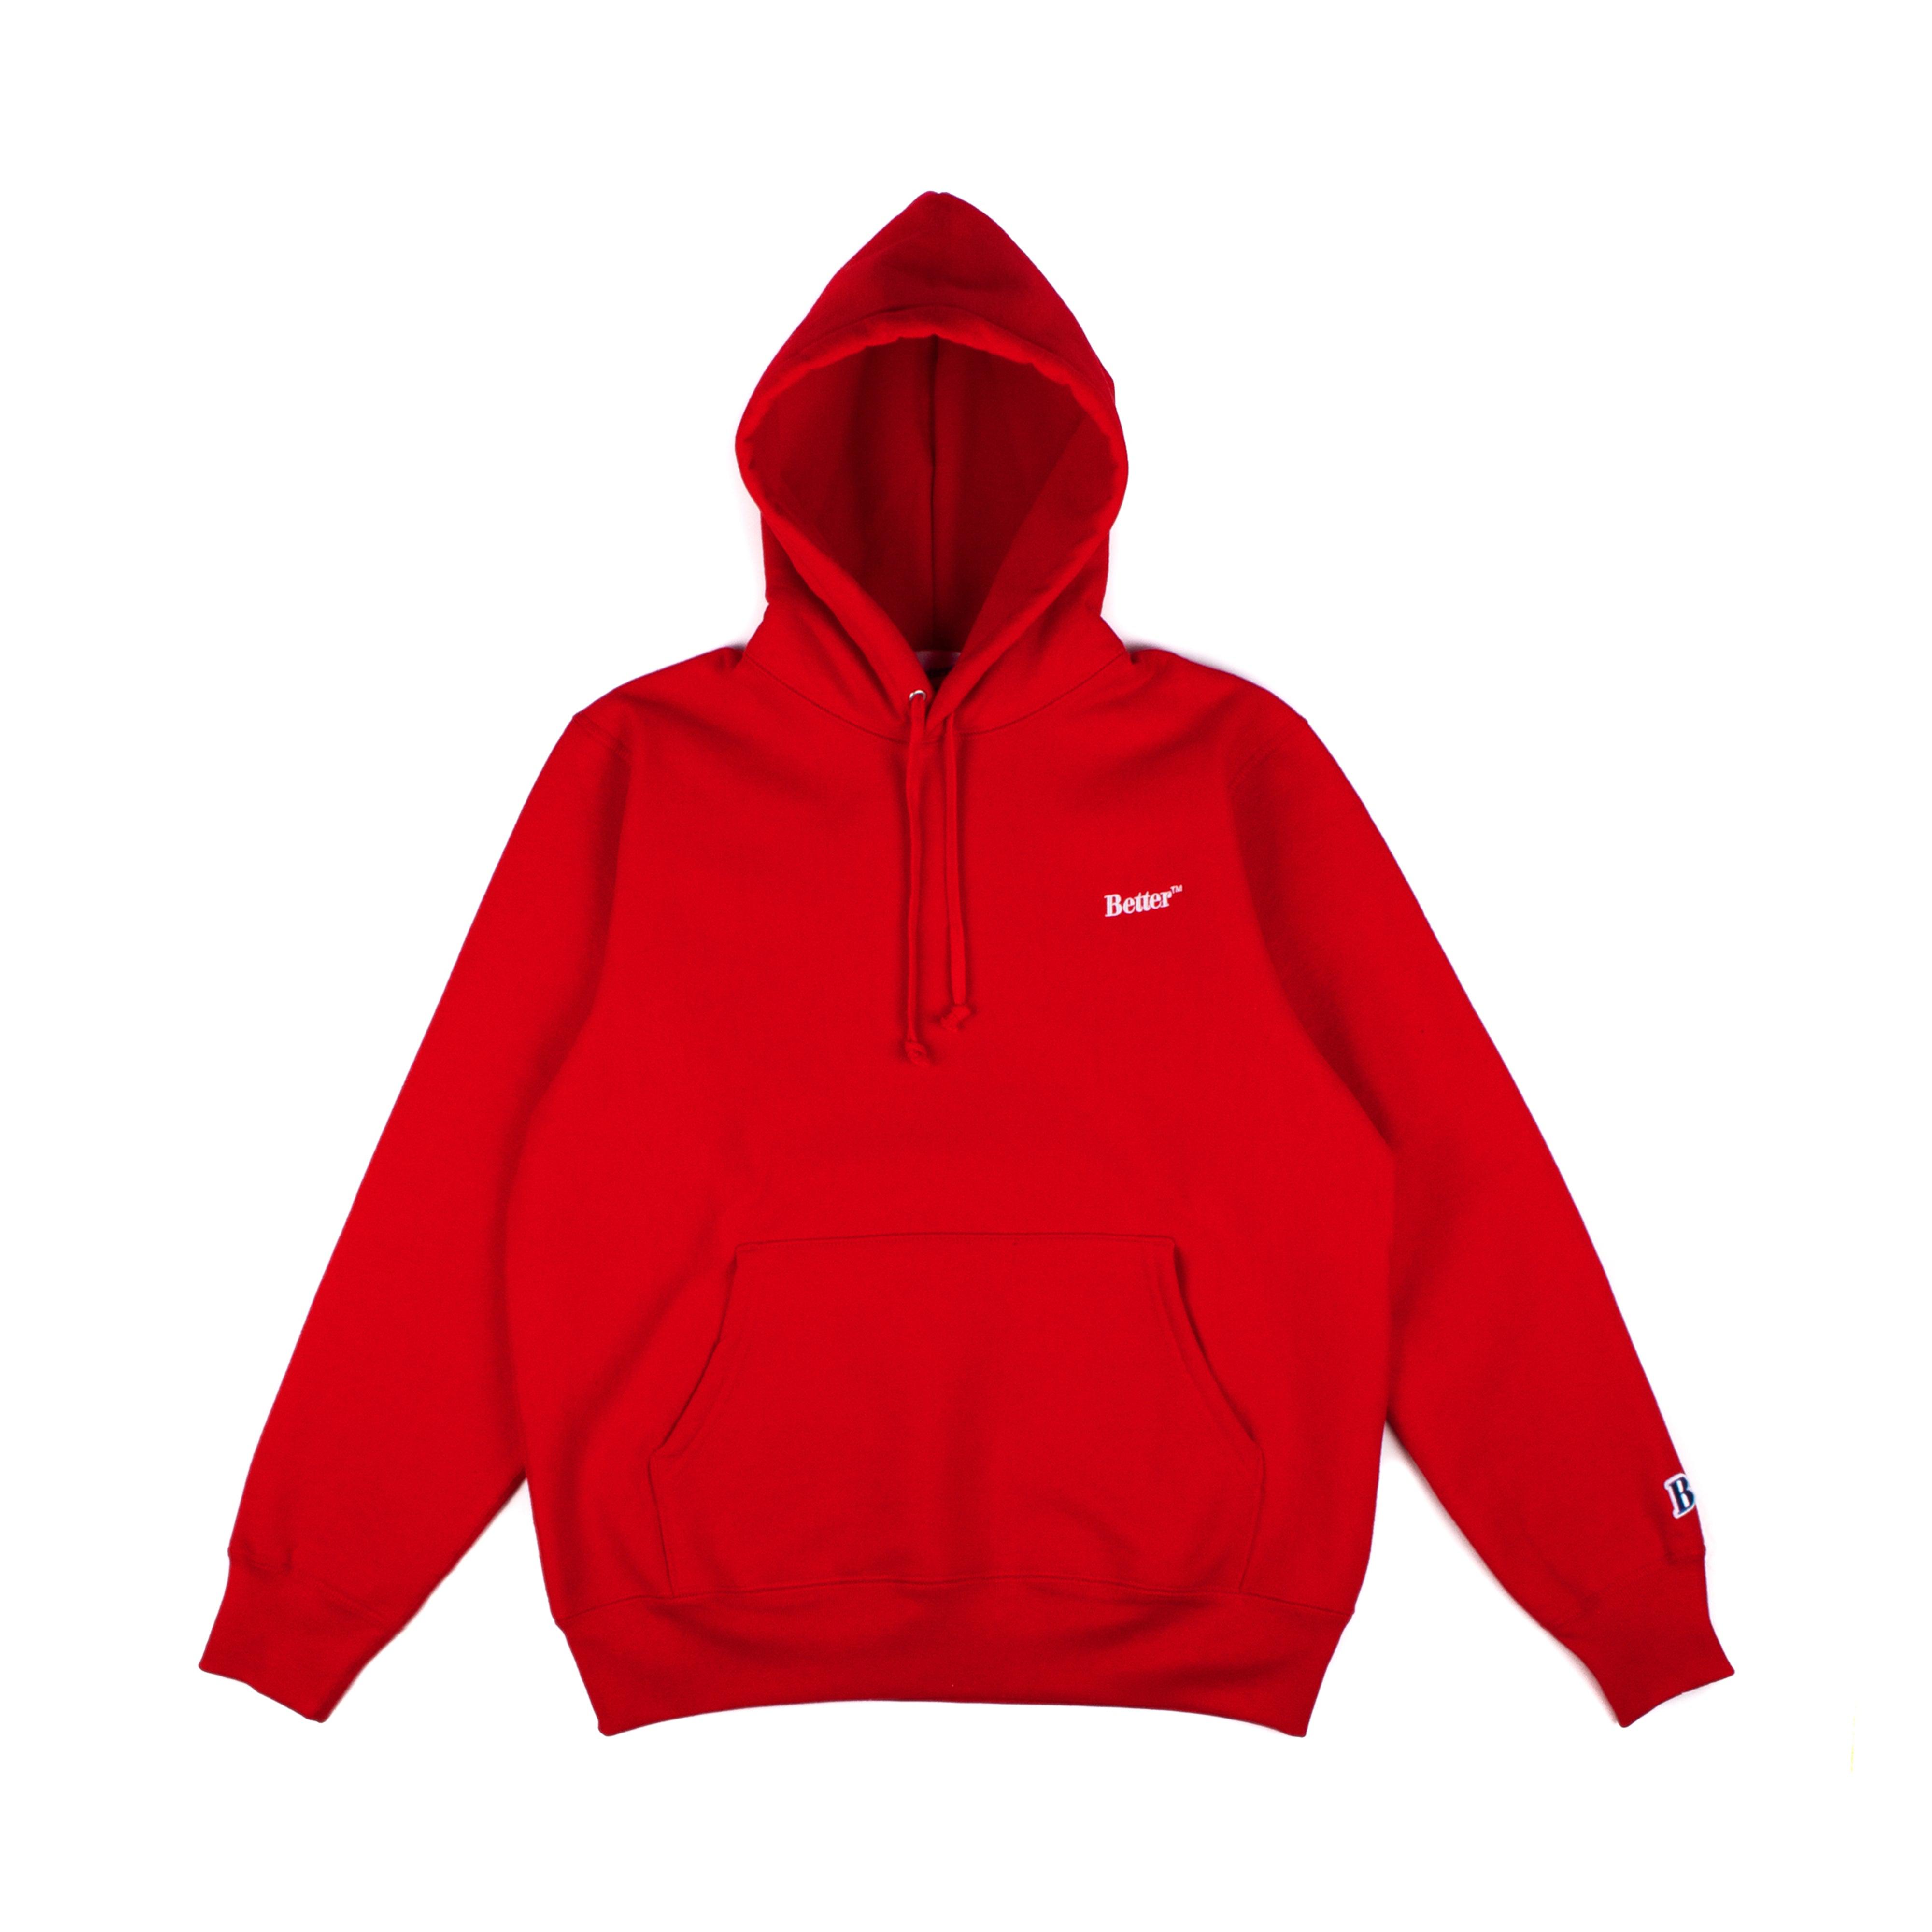 Better™ Gift Shop Logo Hoodie (Red) by BETTER GIFT SHOP